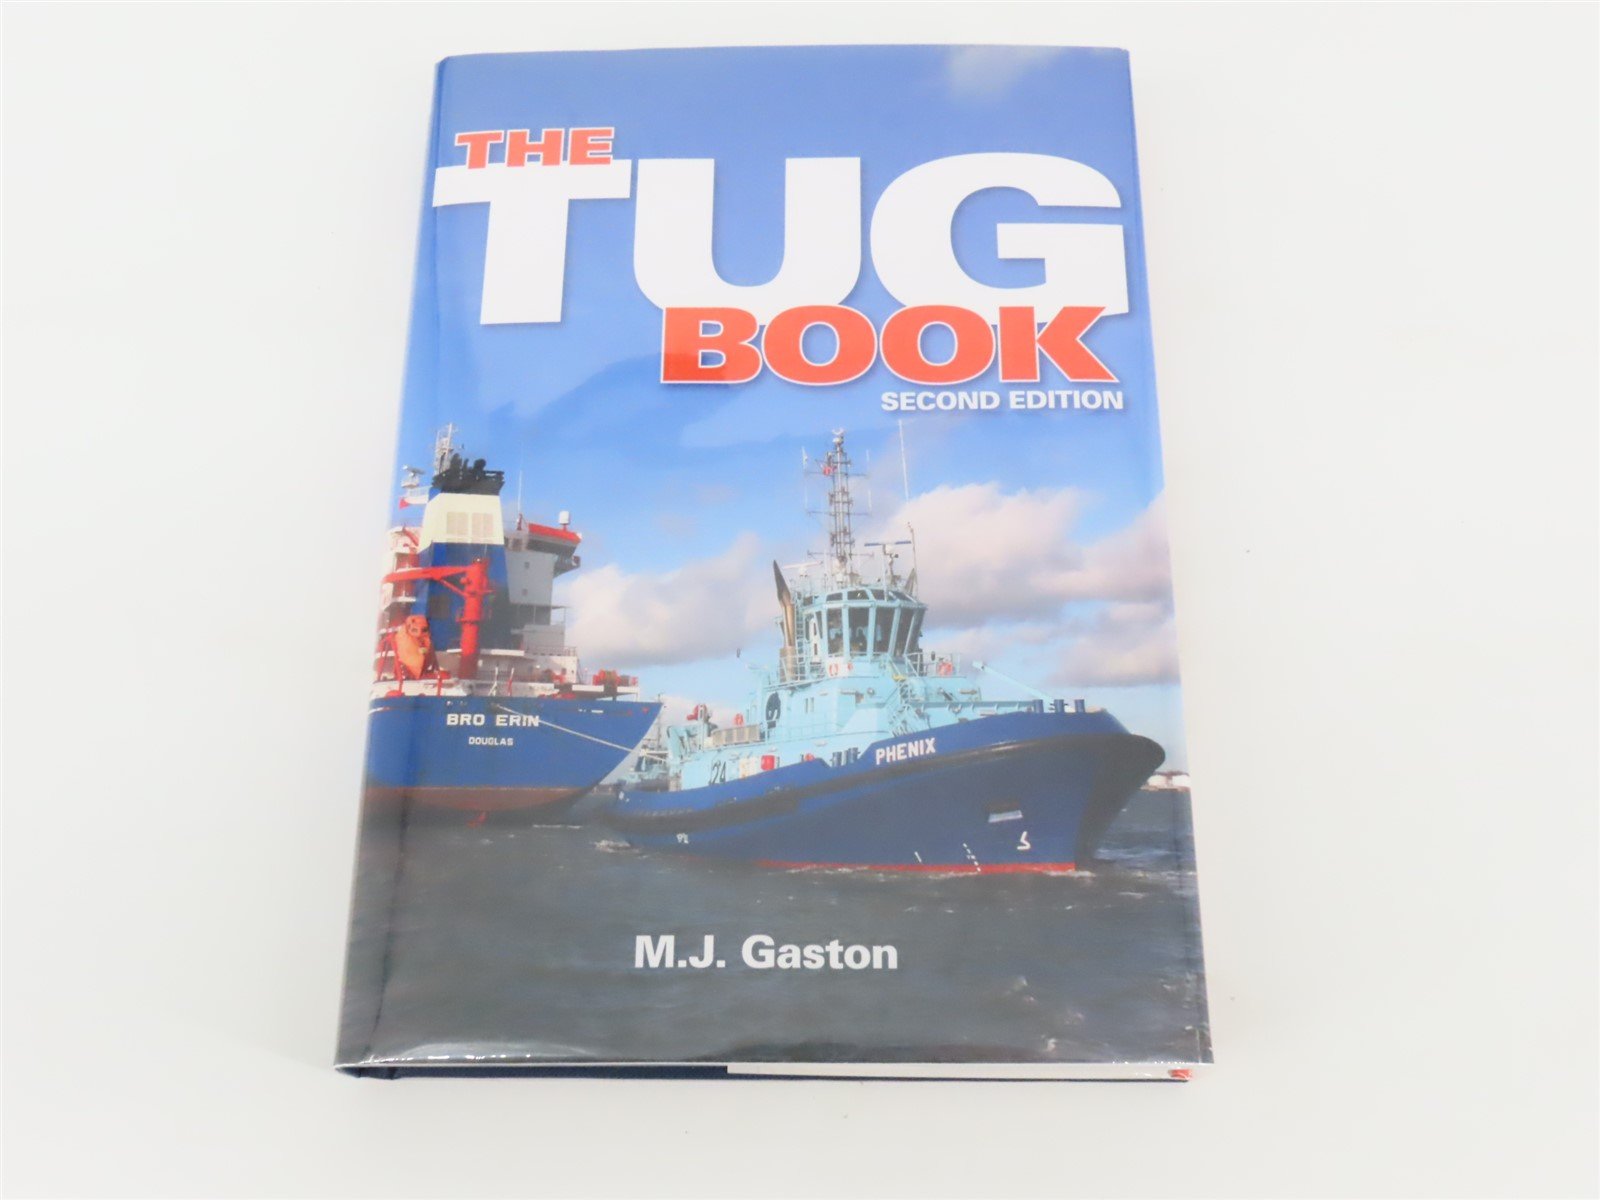 The Tug Book Second Edition by M.J. Gaston ©2009 HC Book